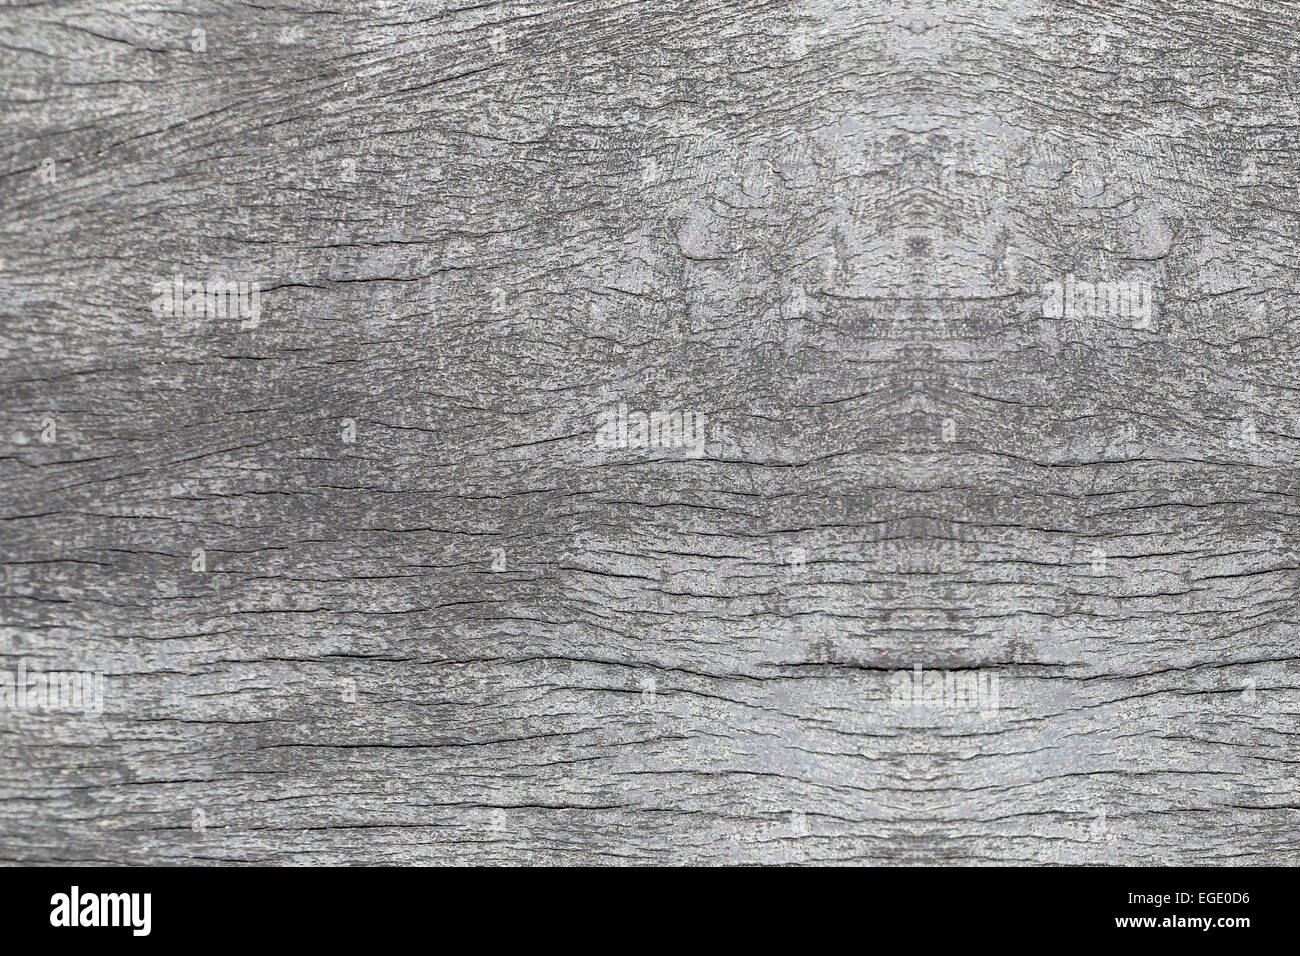 old wood textures for background. Stock Photo